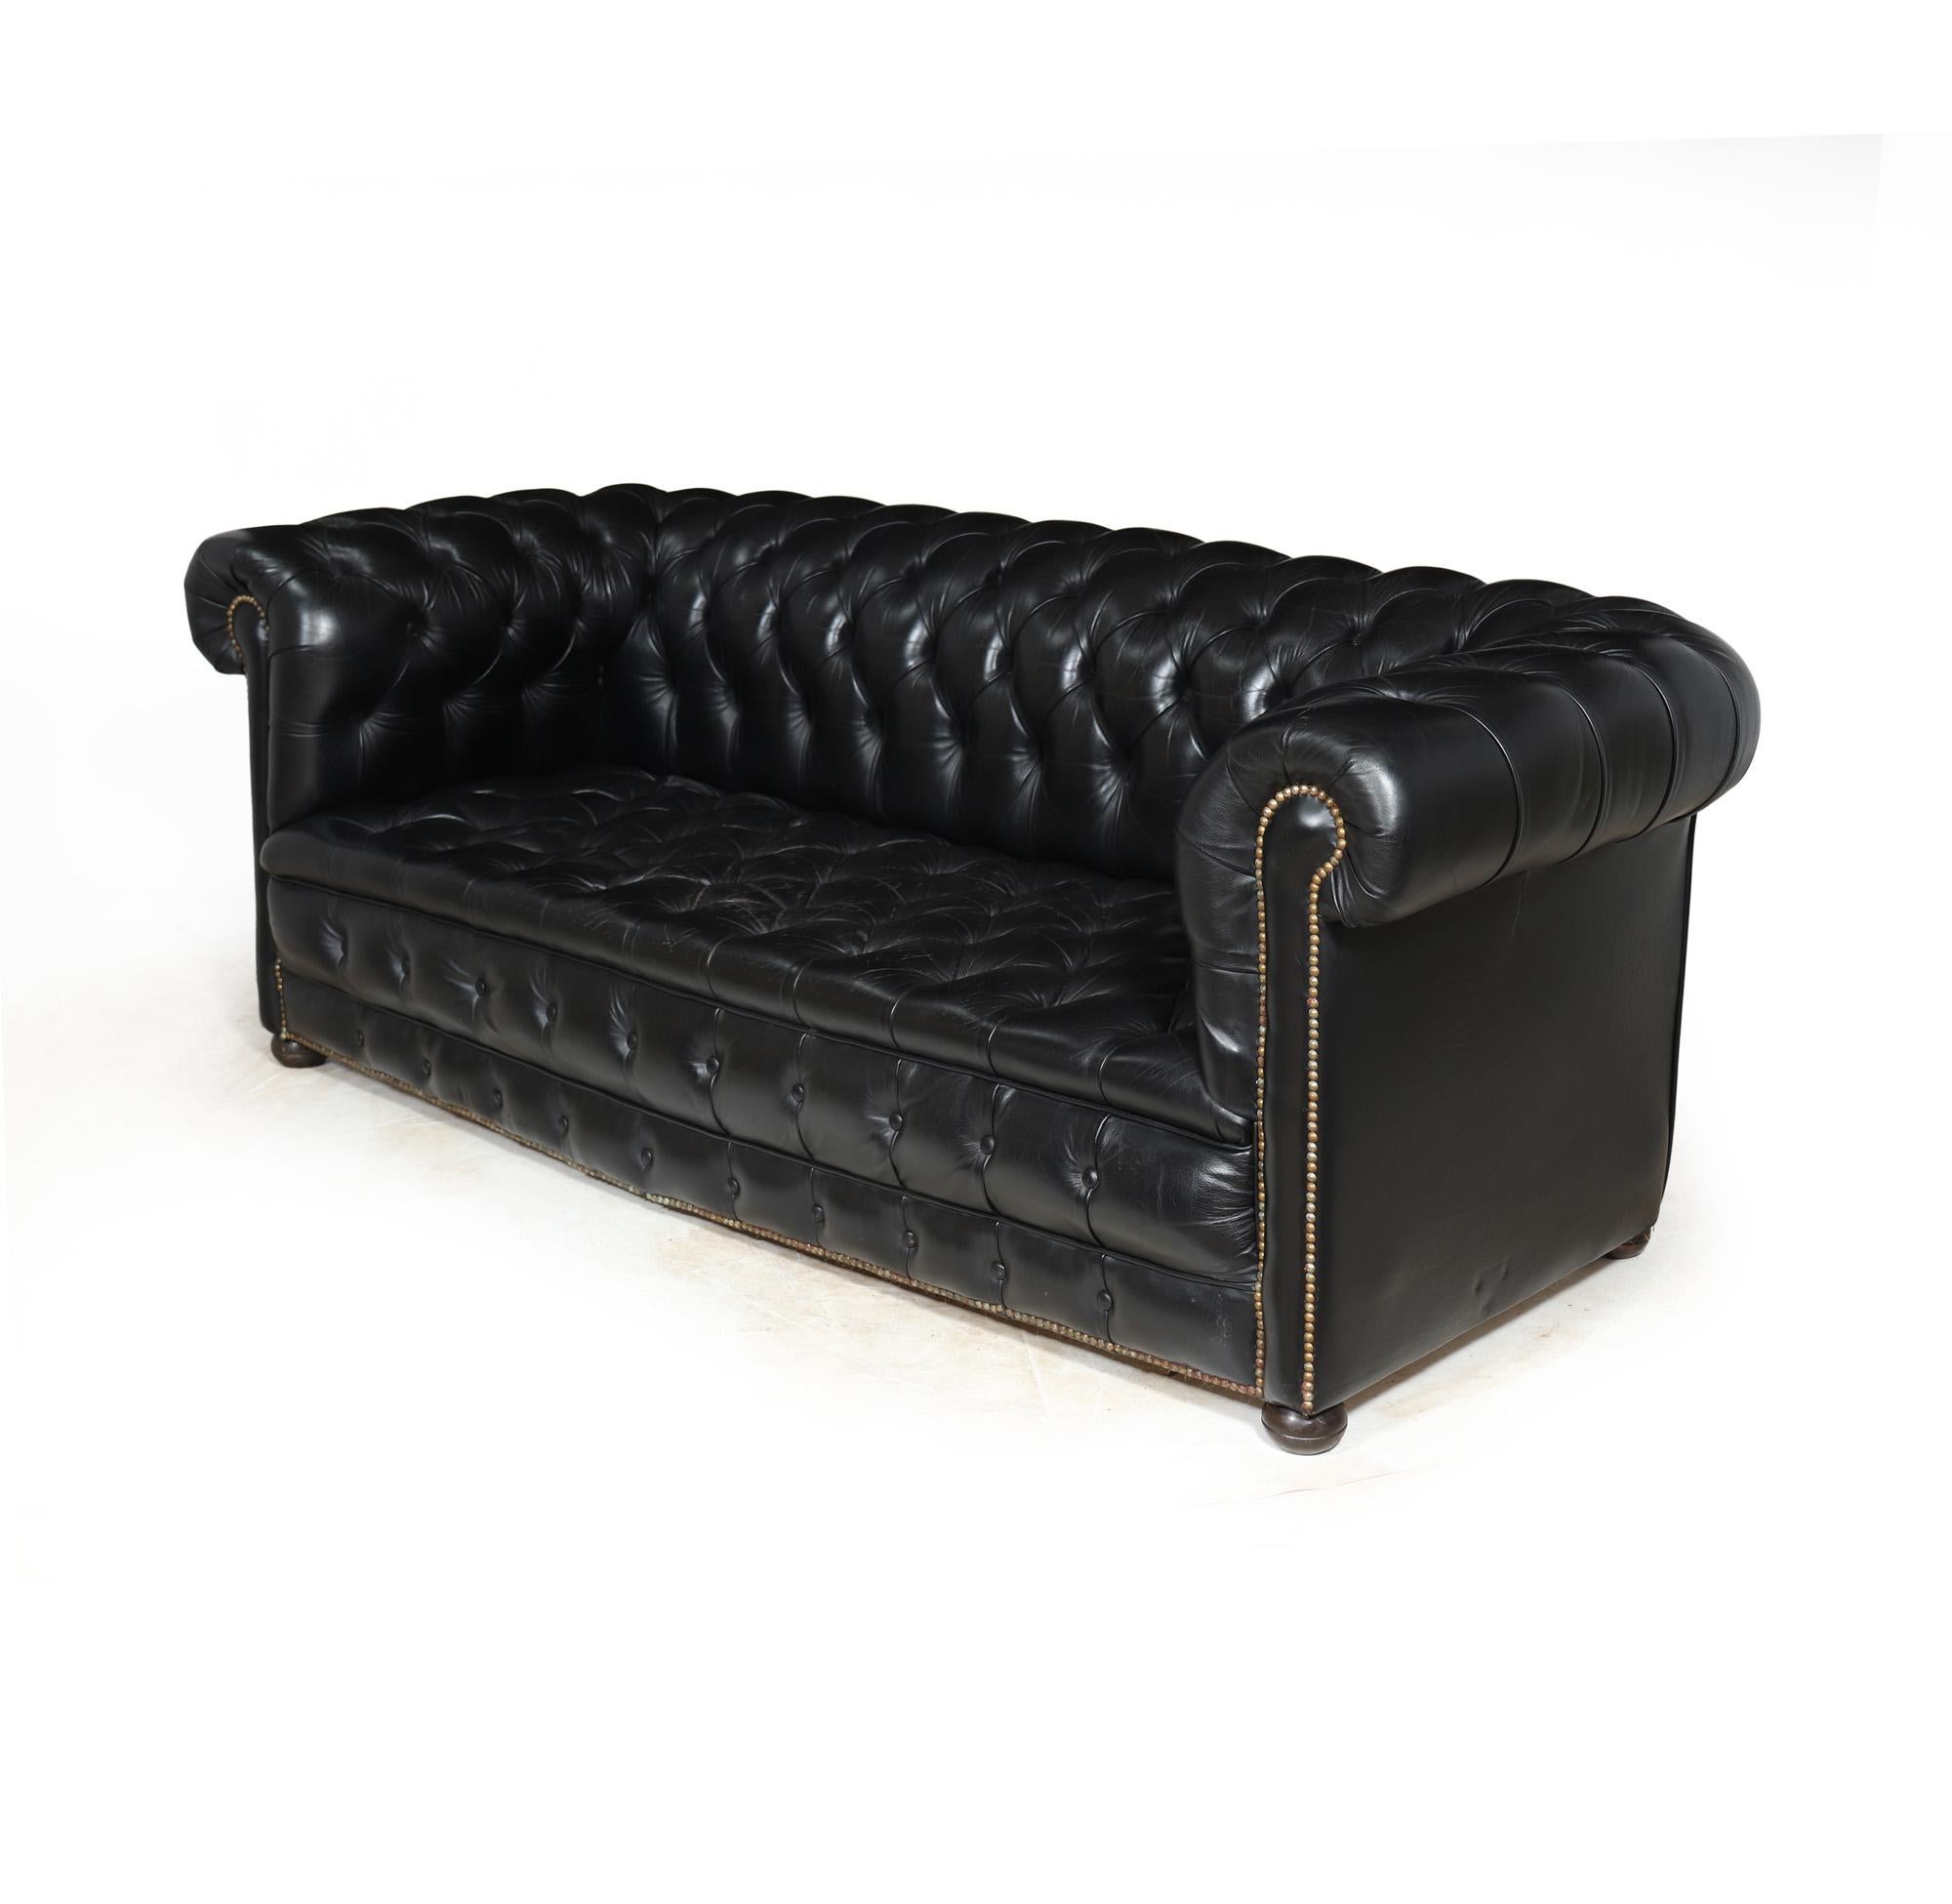 British Black leather Buttoned seat Chesterfield Sofa